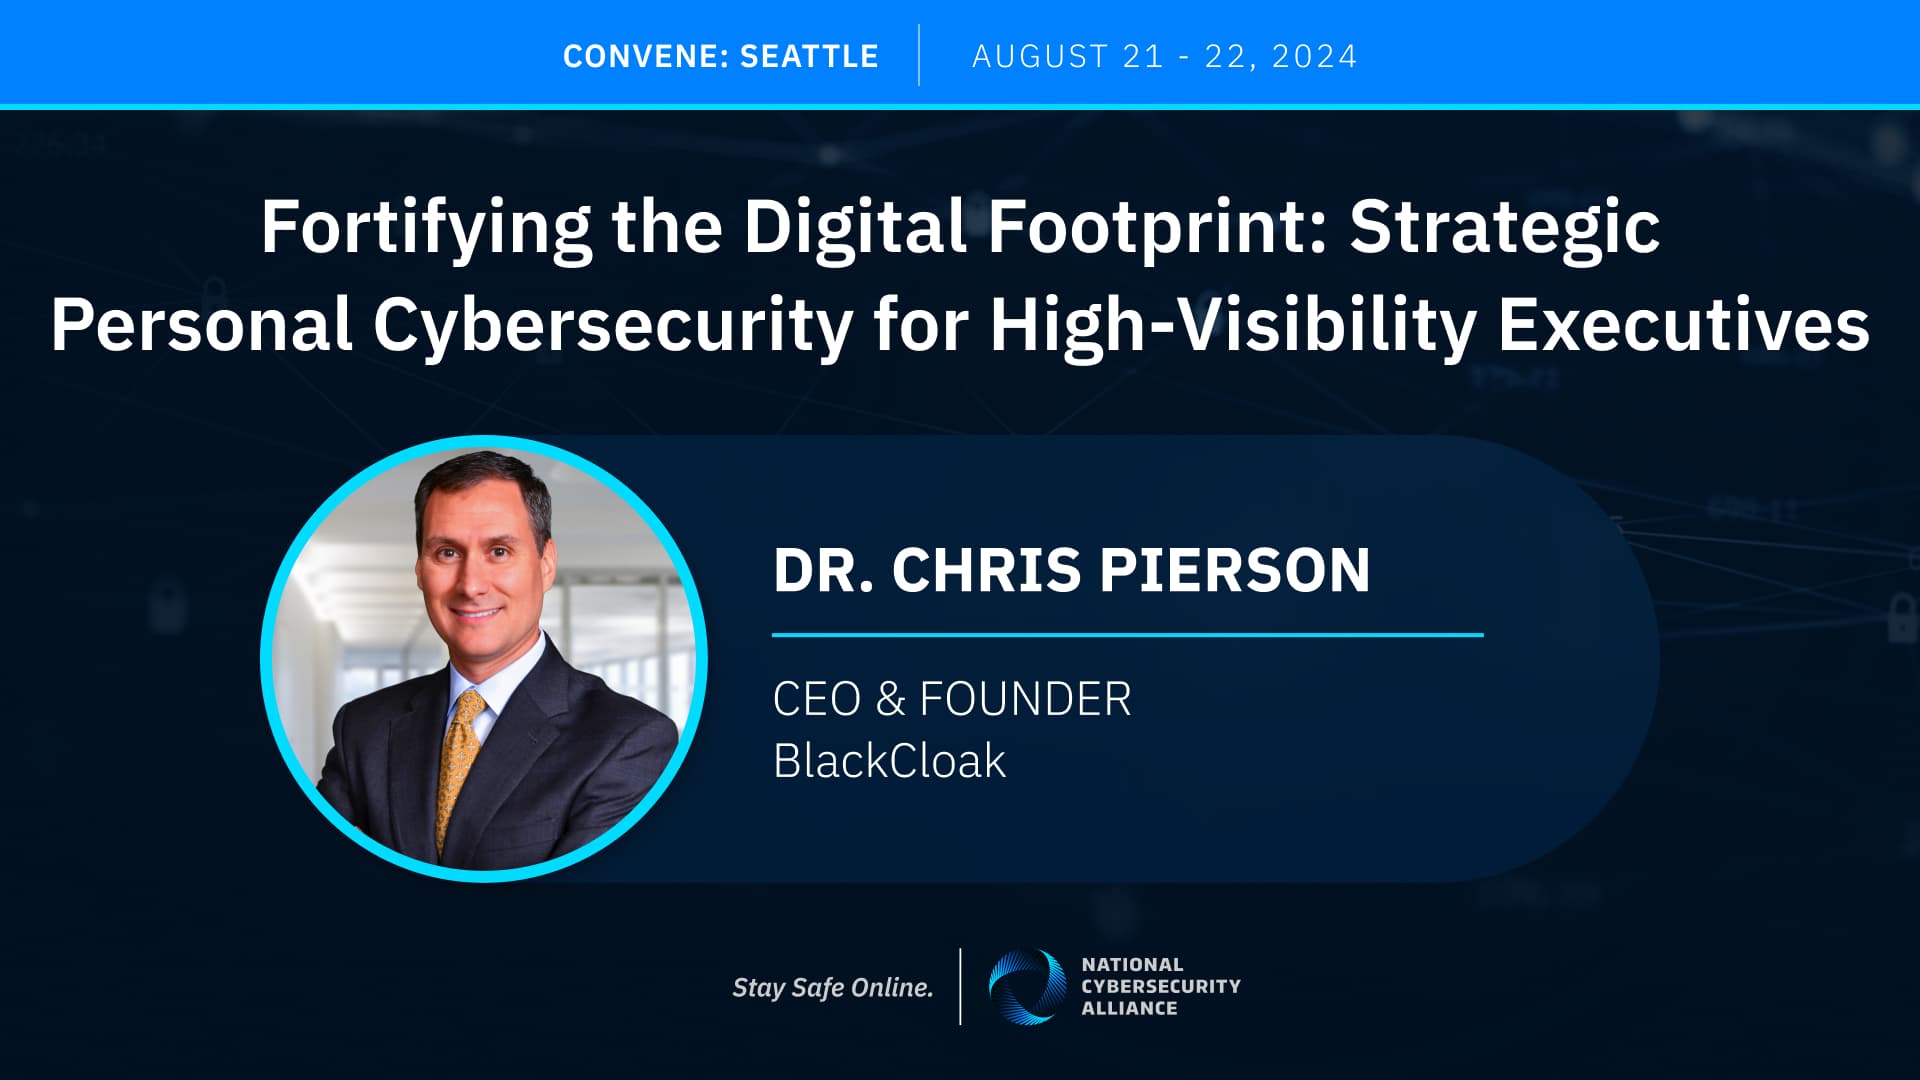 Fortifying the digital footprint: Strategic Personal Cybersecurity for High-Visibility Executives